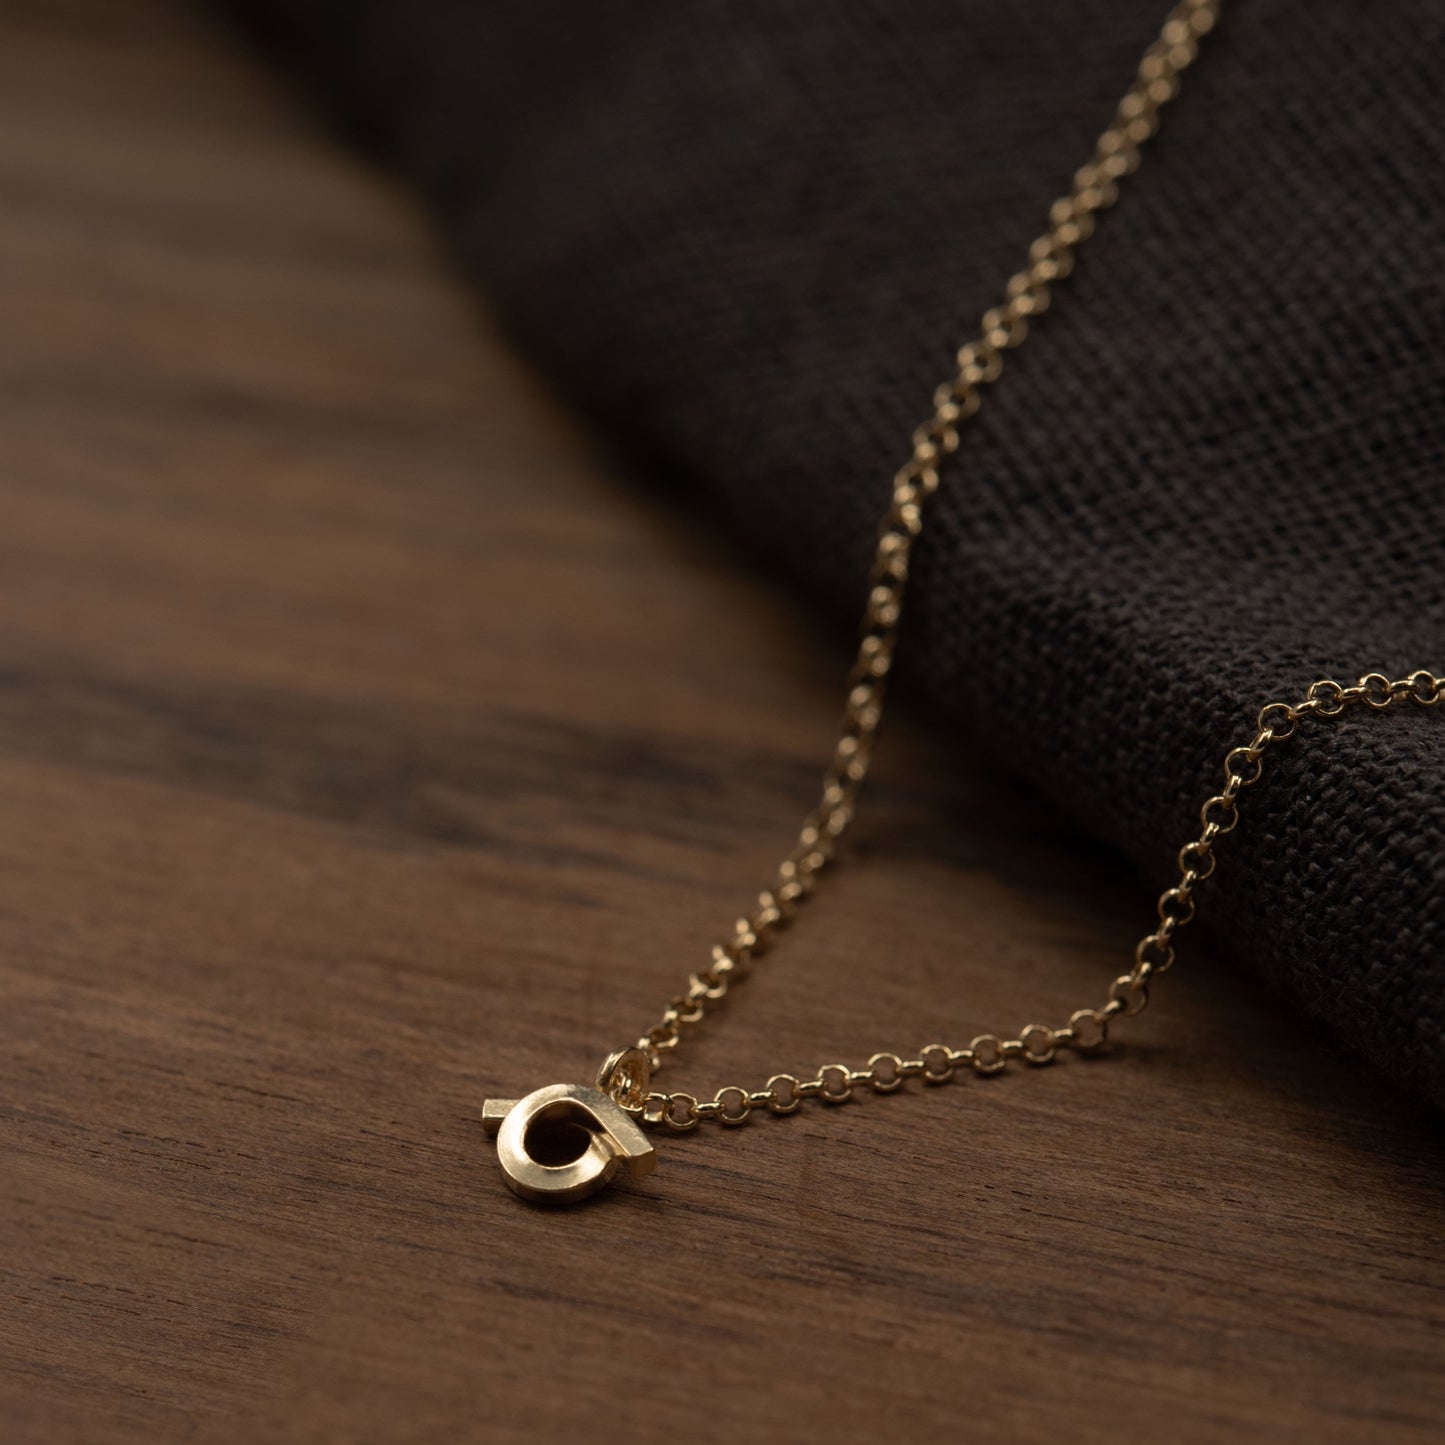 Small open circle pendant necklace N°10 in gold plated silver